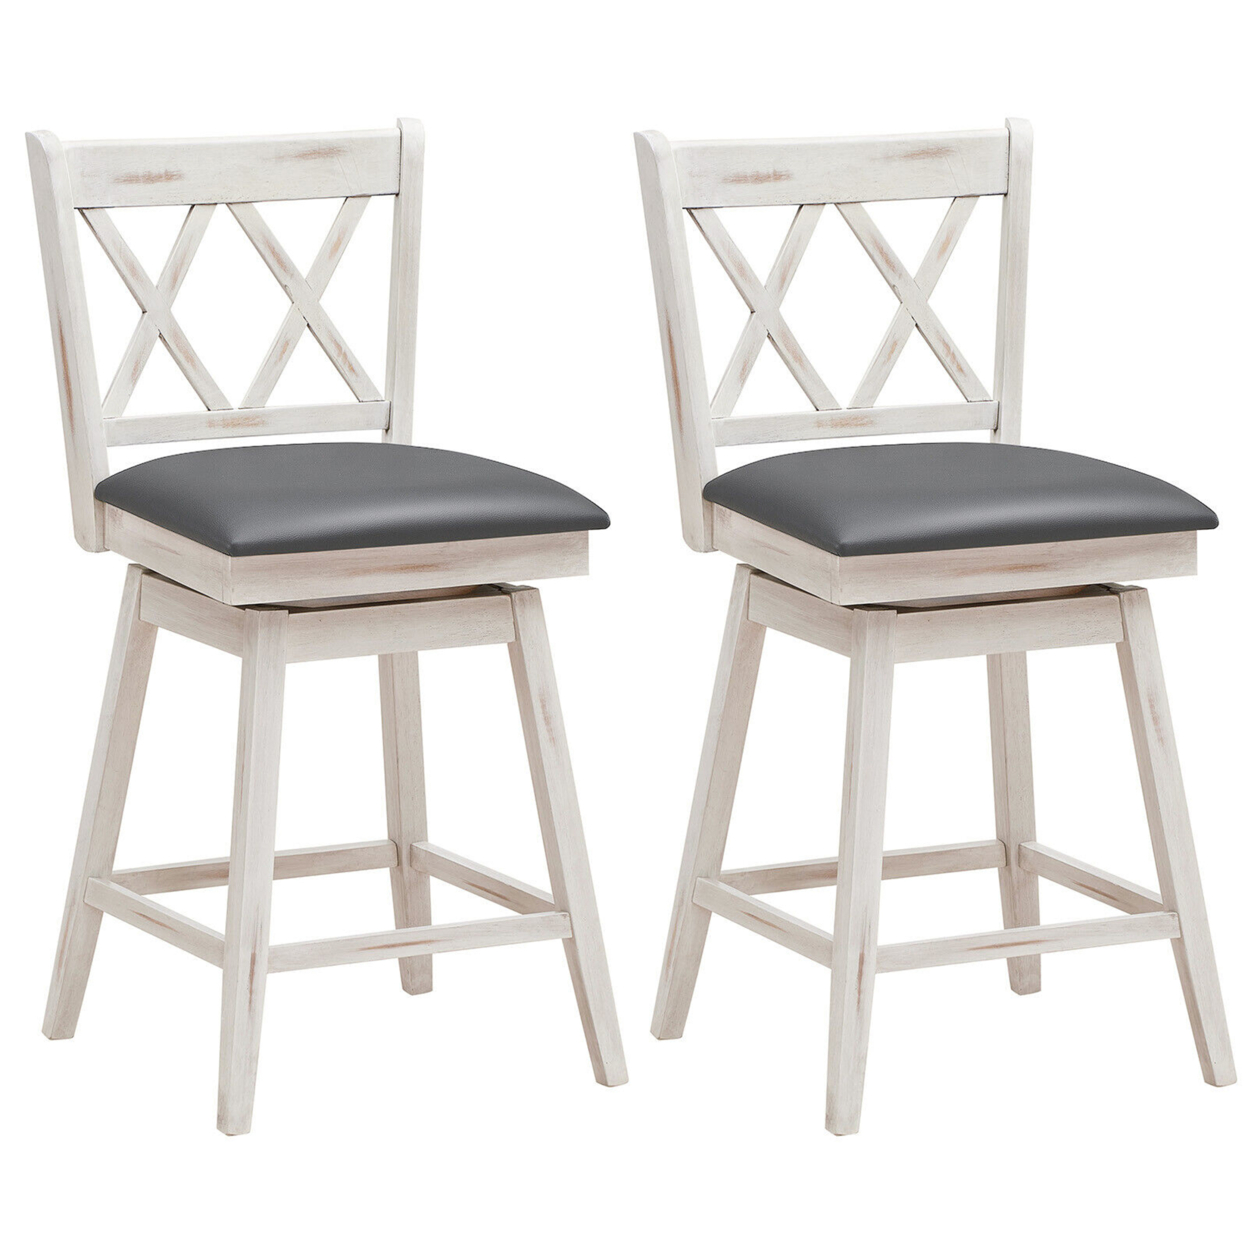 Set Of 2 Barstools Swivel Counter Height Chairs W/Rubber Wood Legs - Antique White